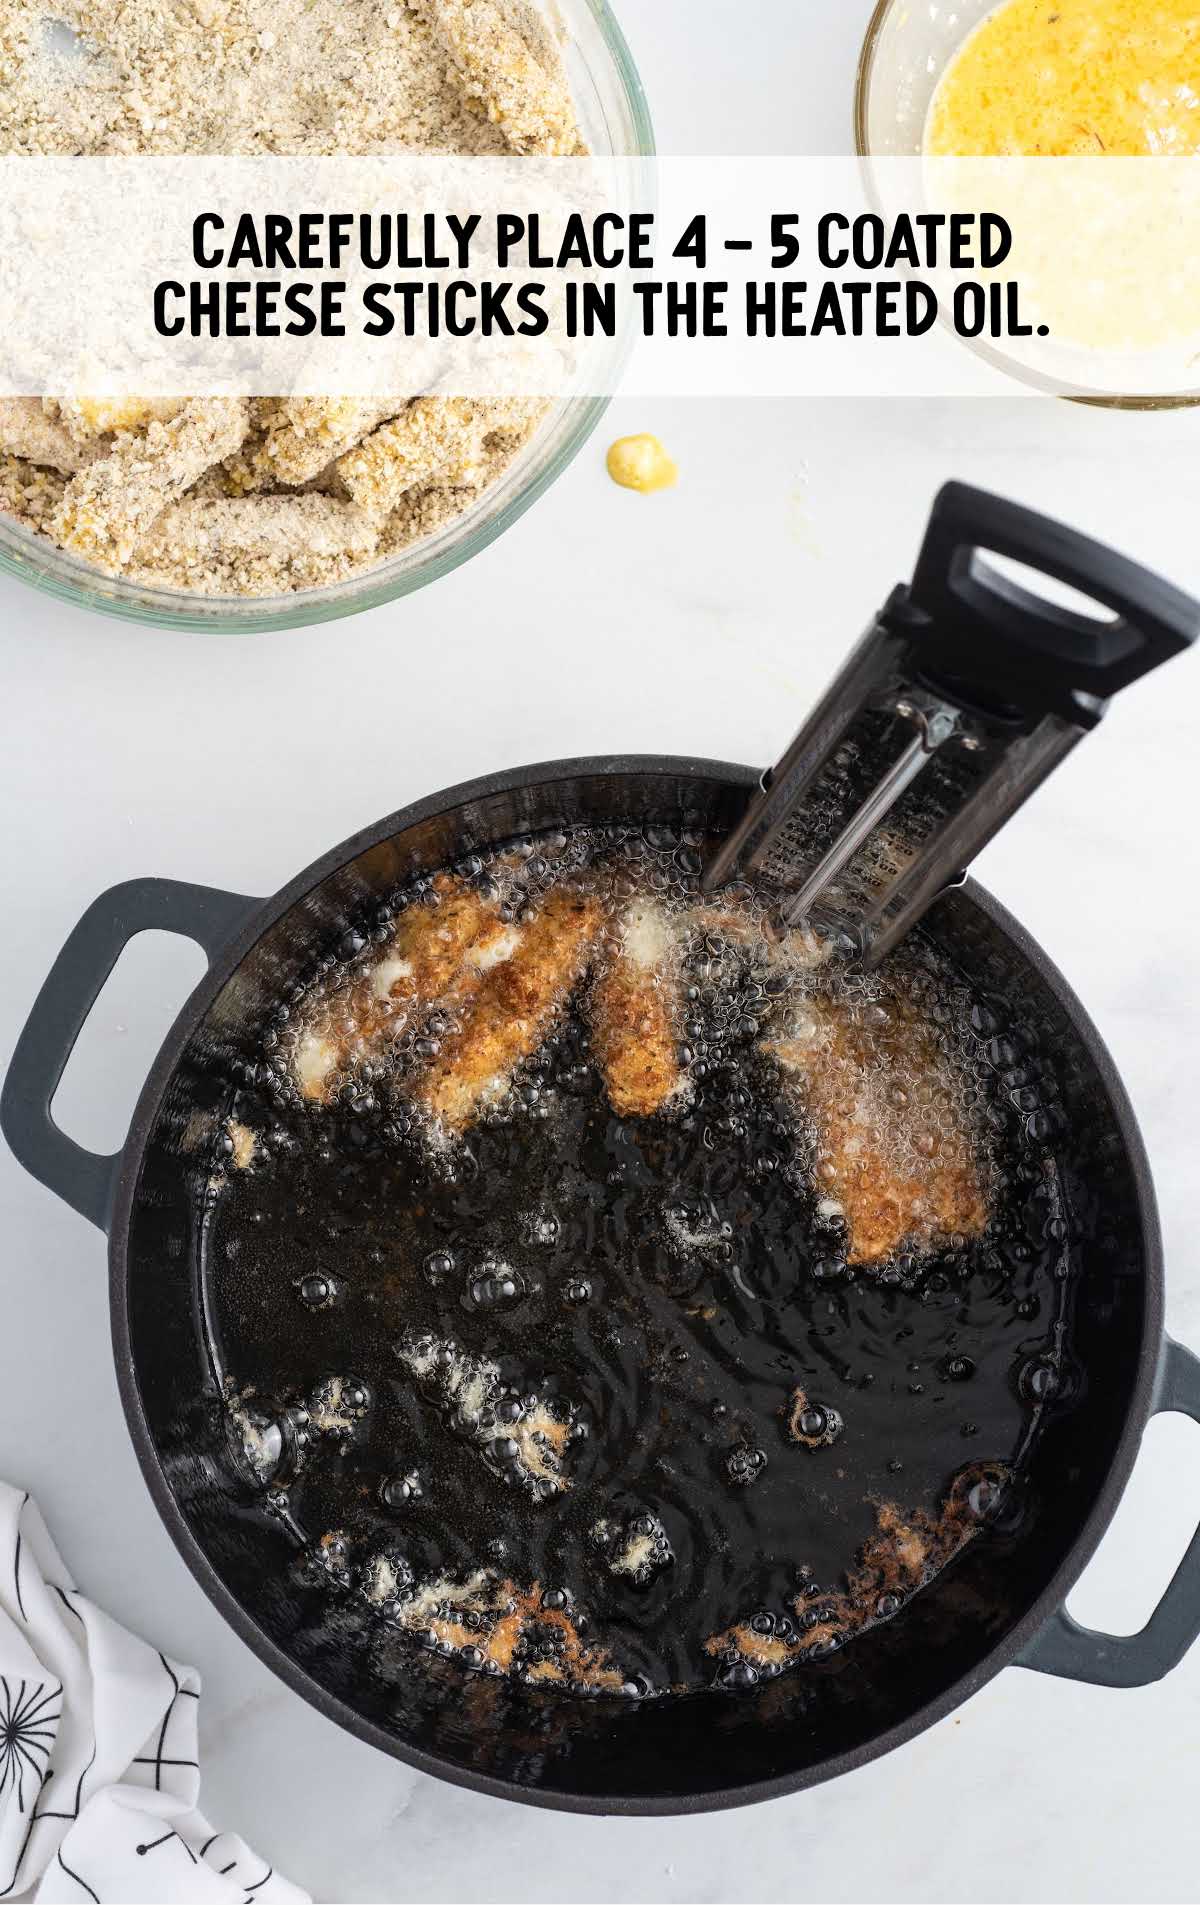 cheese sticks in a heated oil on a frying pan